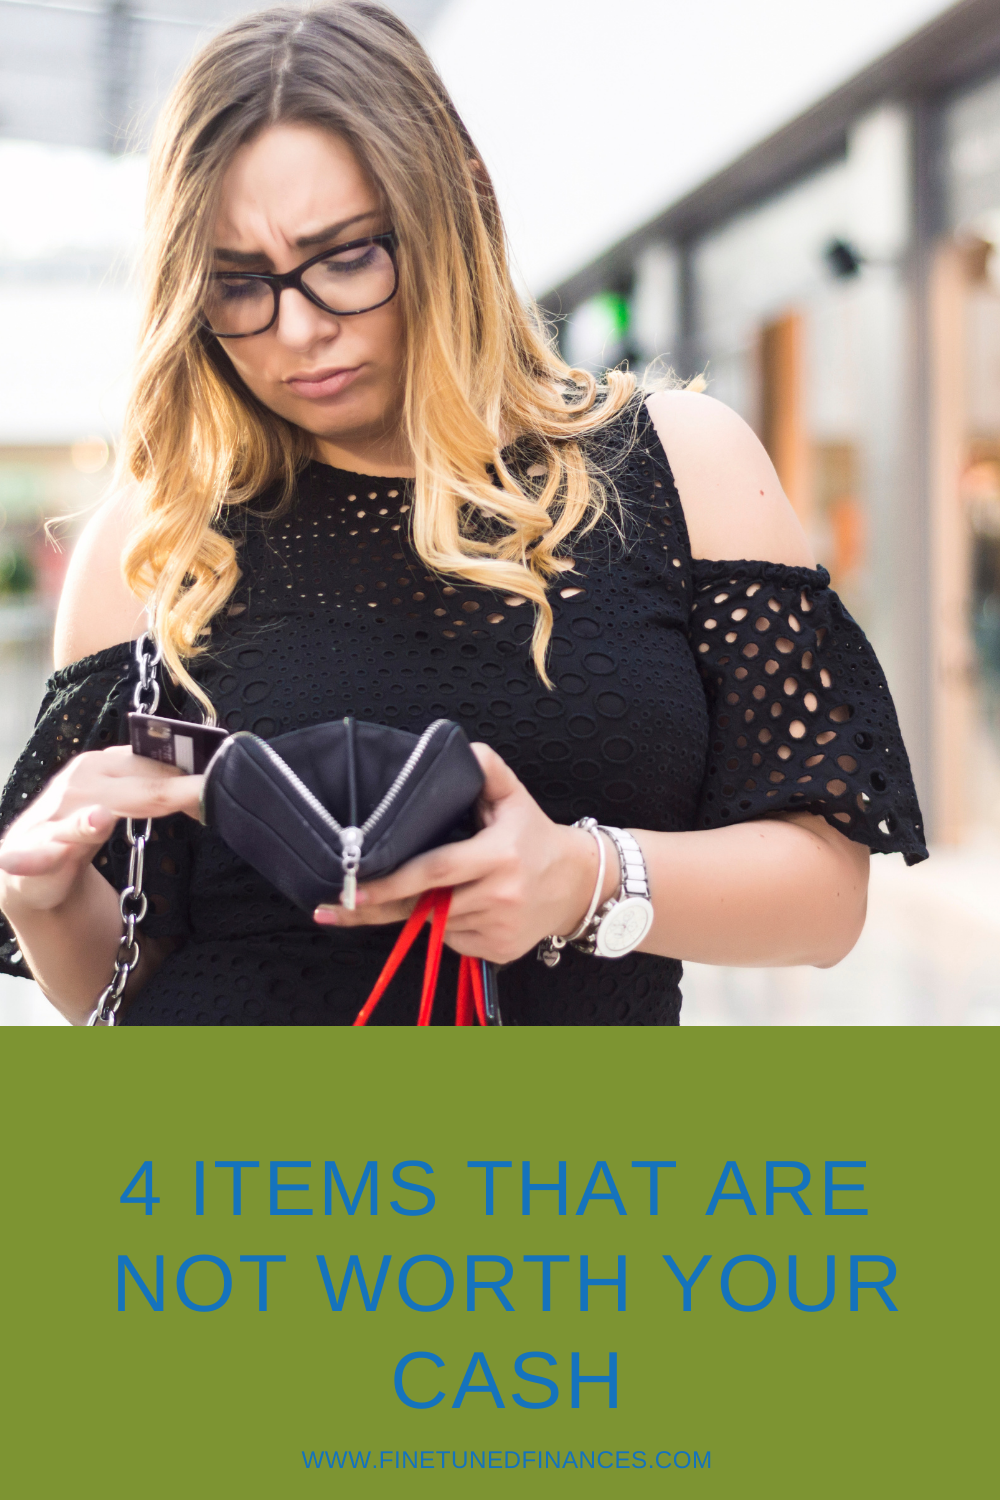 4 Items That Are Not Worth Your Cash